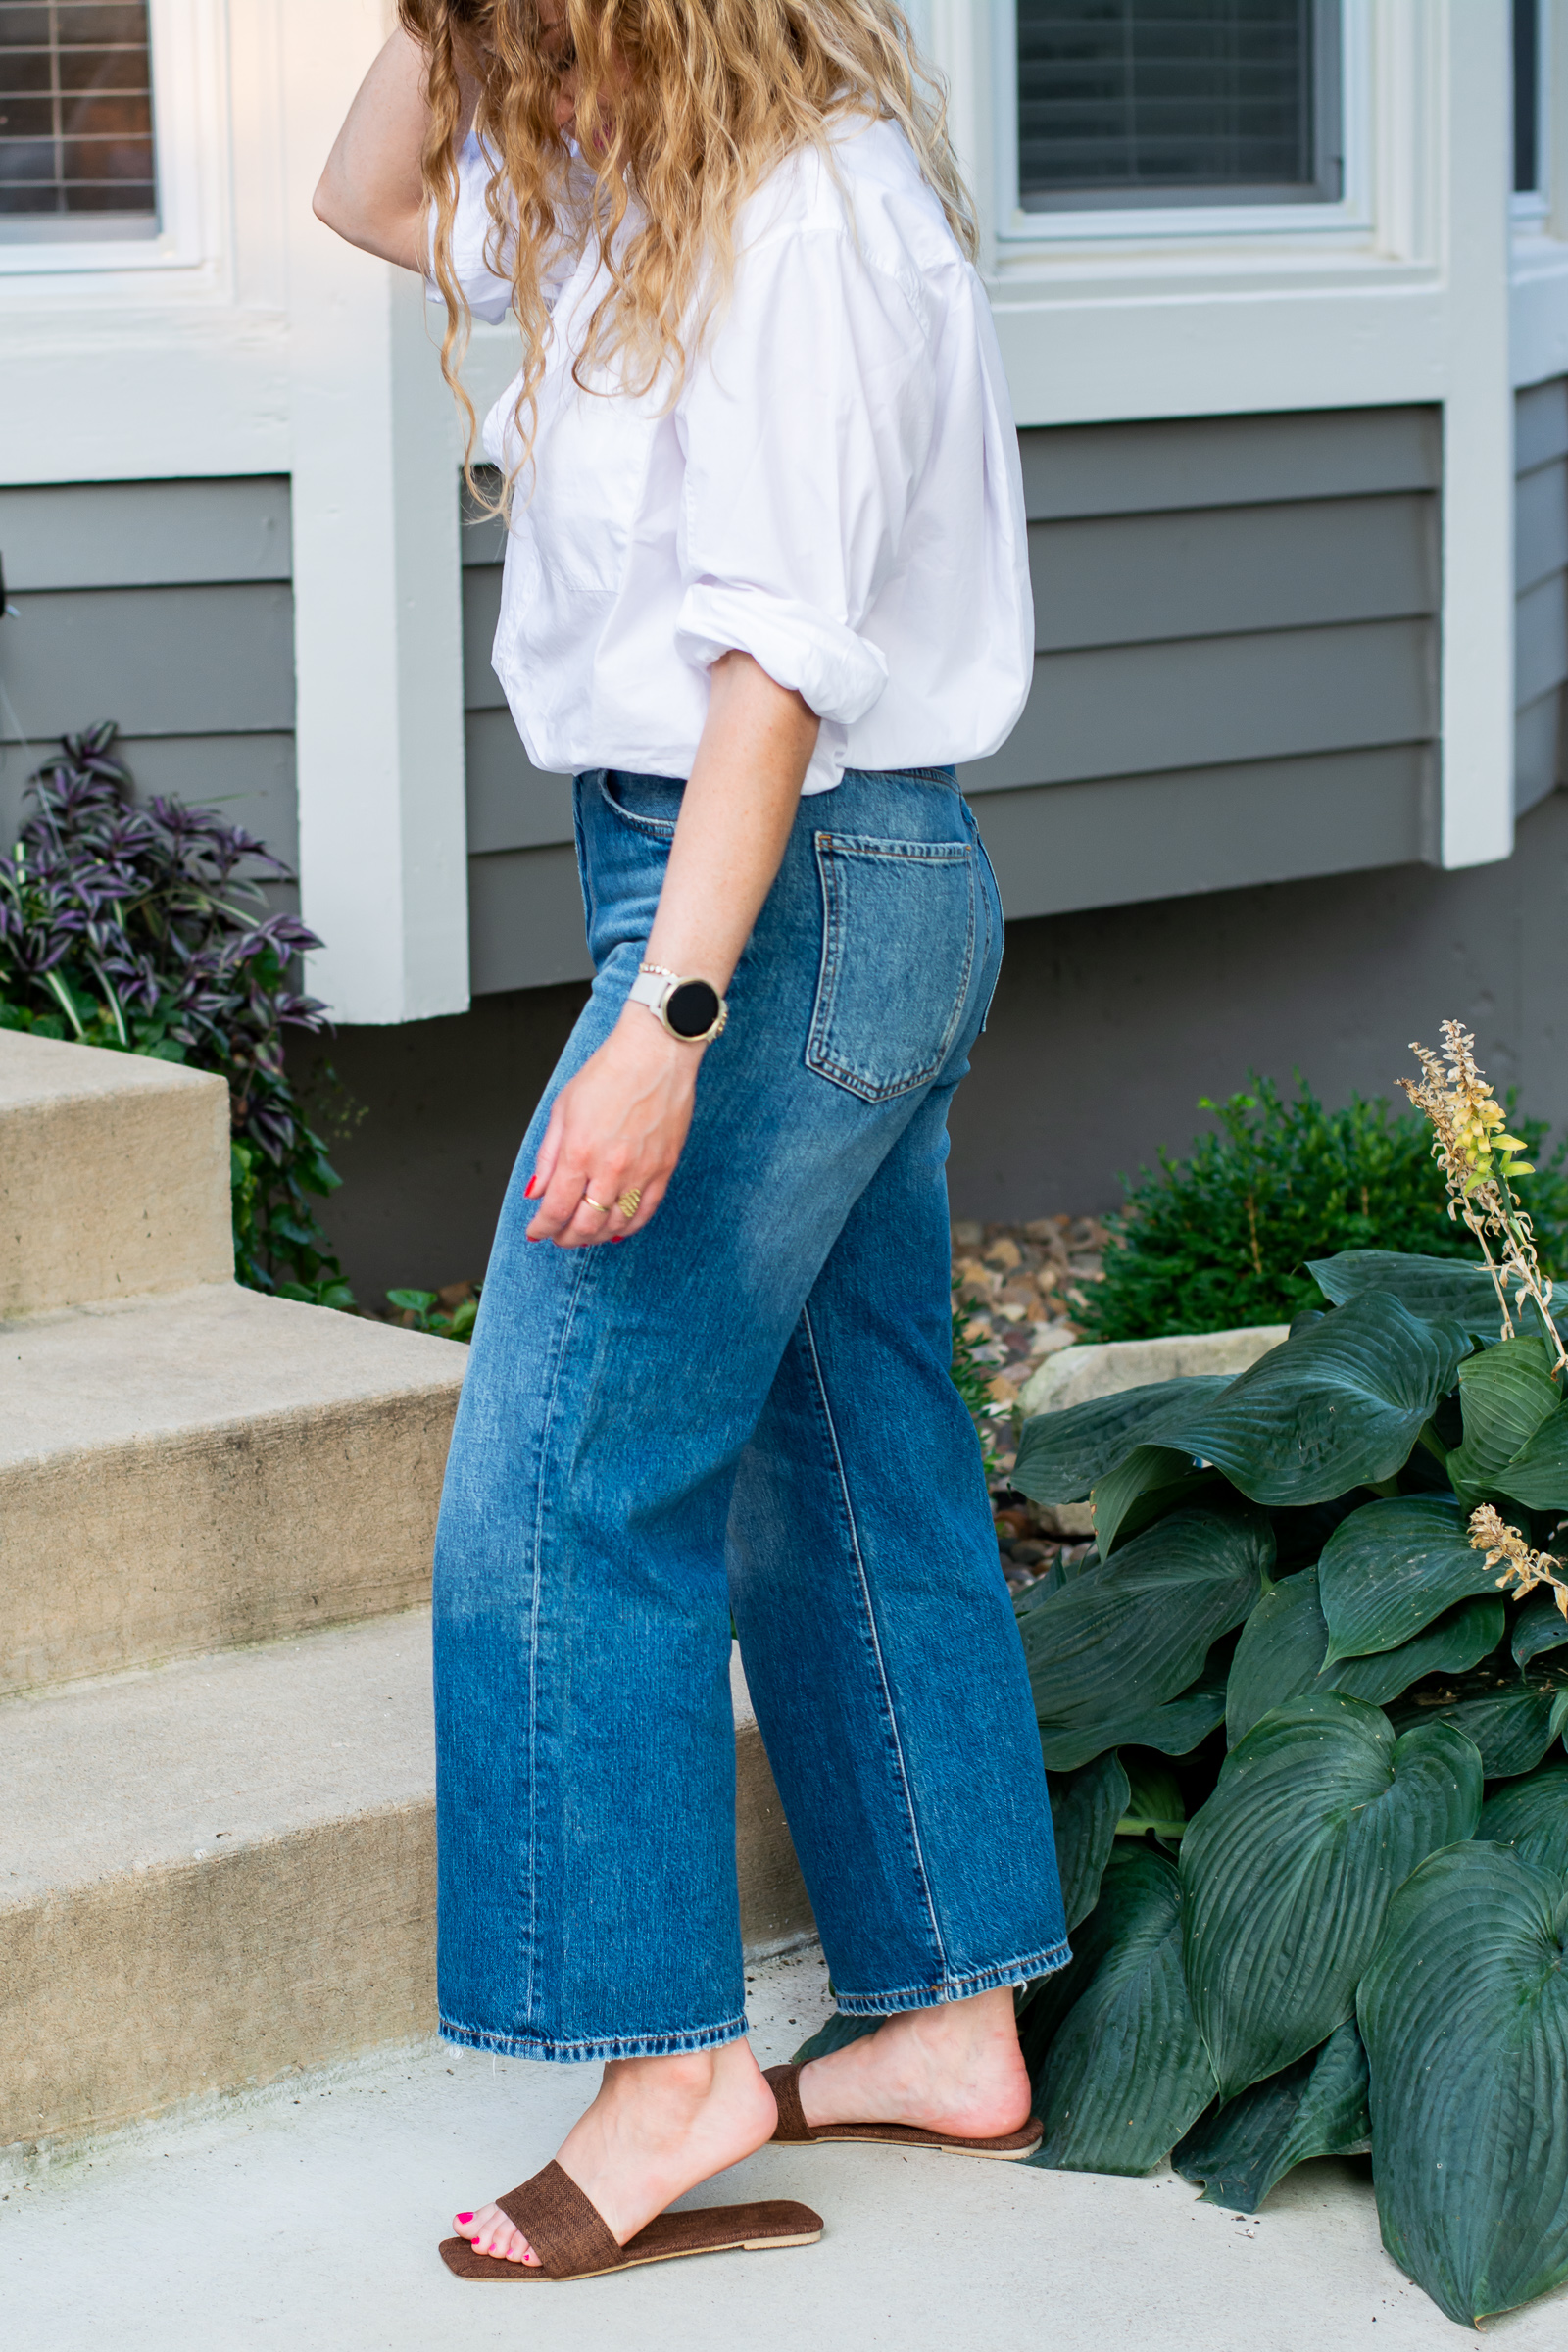 Elevated Basics: White Button-Up Shirt + Jeans. | LSR